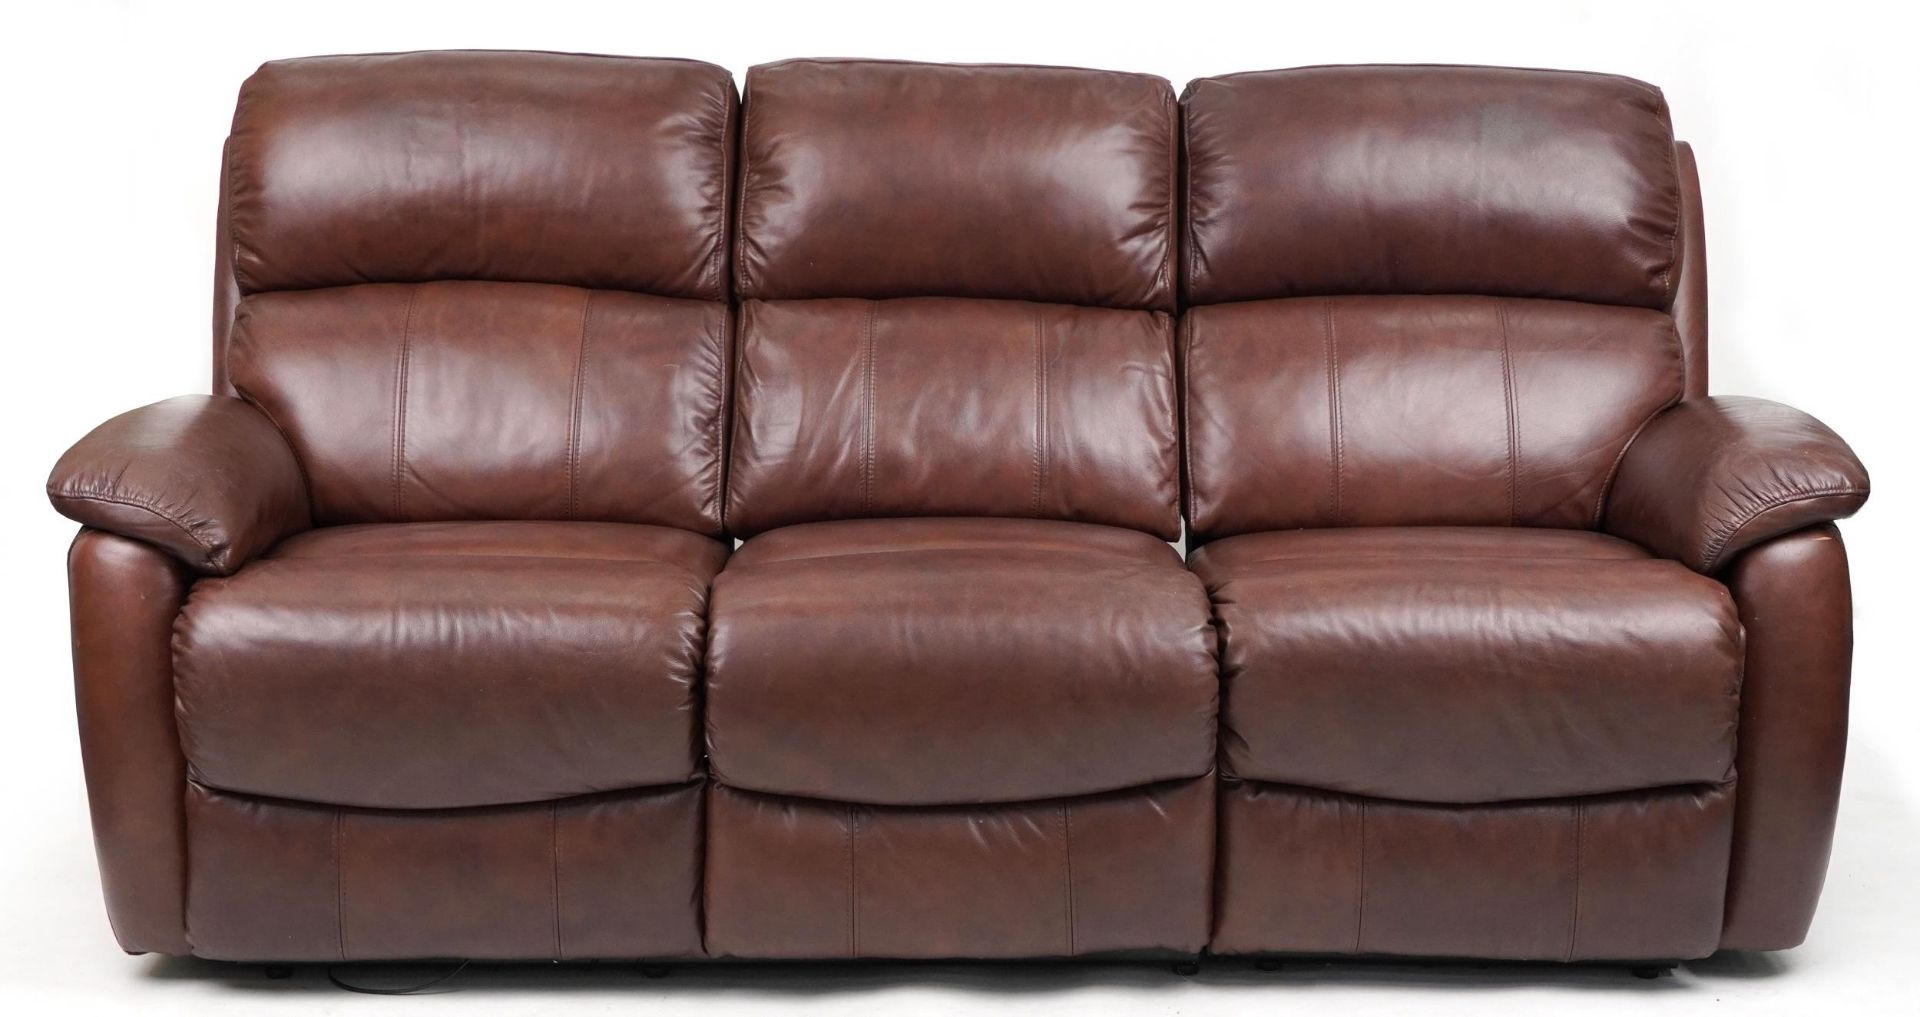 Contemporary brown leather three seater electric reclining sofa with USB charger ports, 205cm in